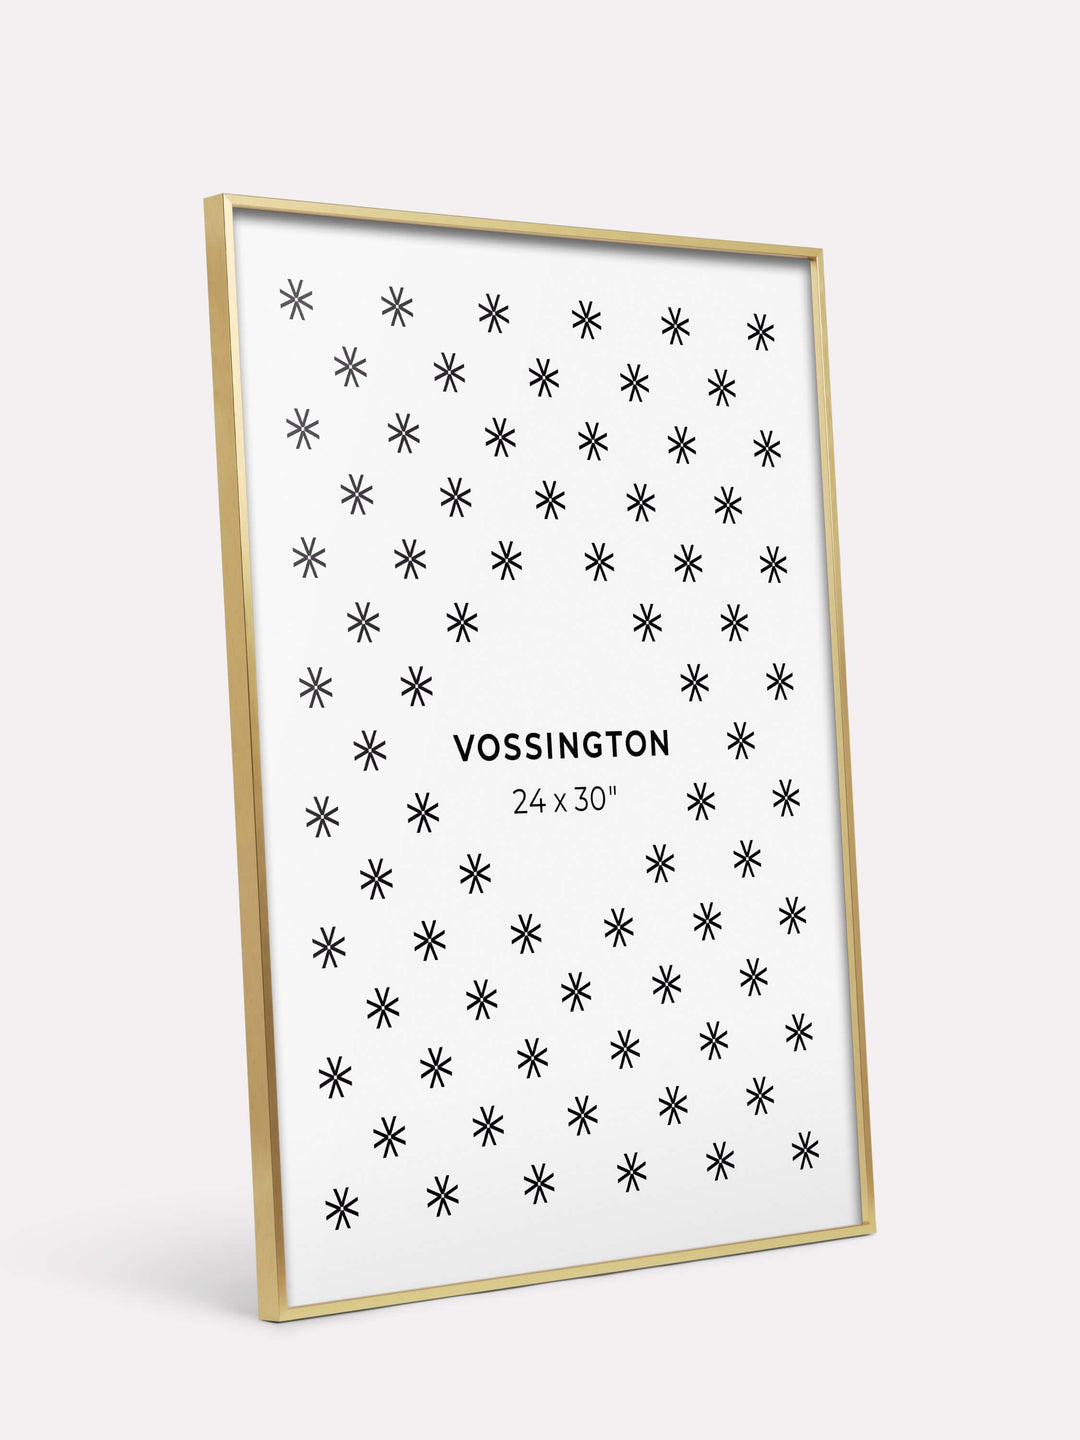 Vossington Thin 24x30 Gold Frame - Modern Picture Frame for Wall - Fits 1 Photo, Poster, Art Print, or Puzzle - 24 x 30 - Large, Fancy, Brass, Metal